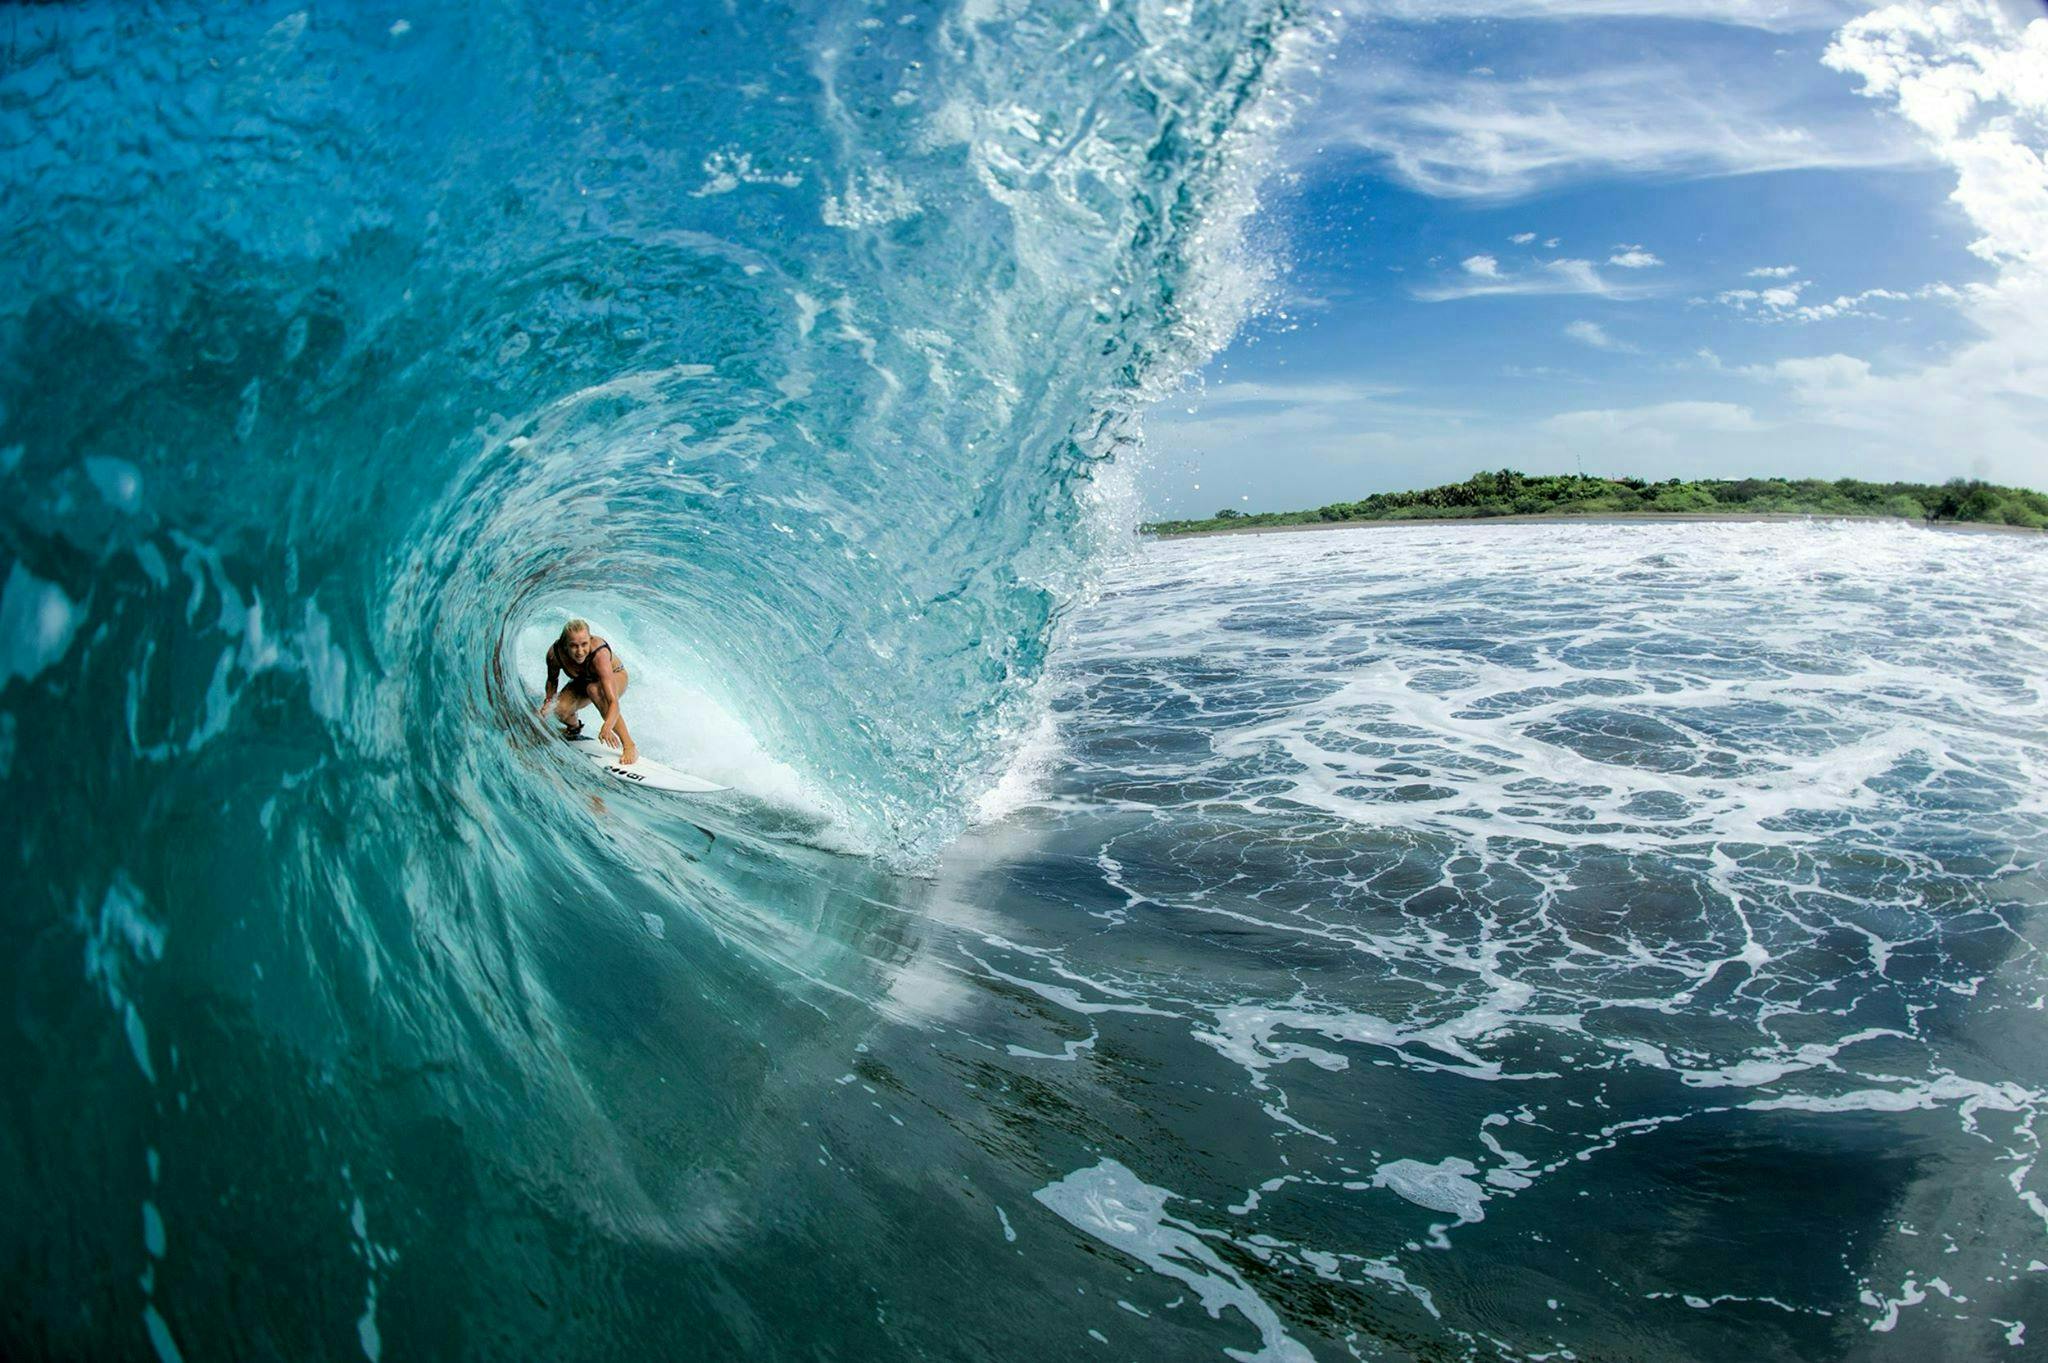 sea ocean nature water outdoors person human sea waves sport surfing